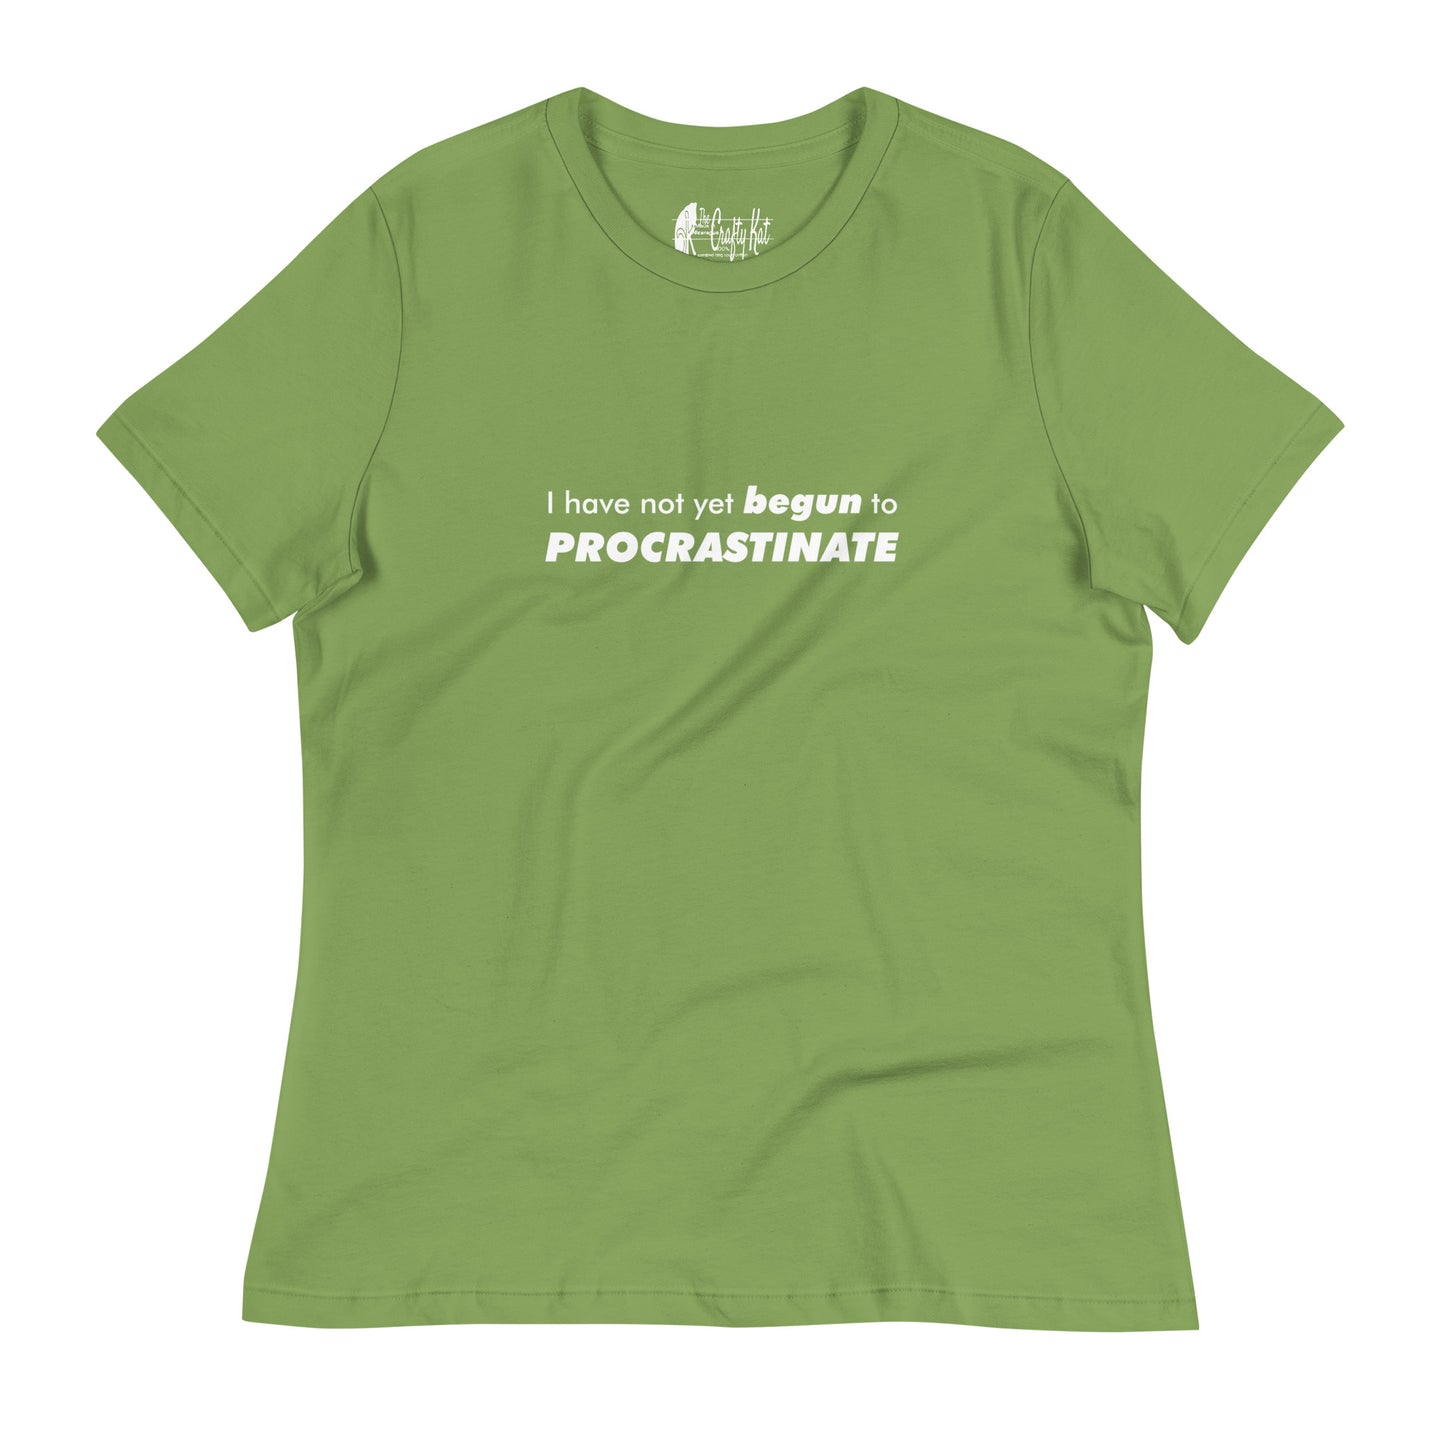 Leaf green women's relaxed-fit t-shirt with text graphic: "I have not yet BEGUN to PROCRASTINATE"